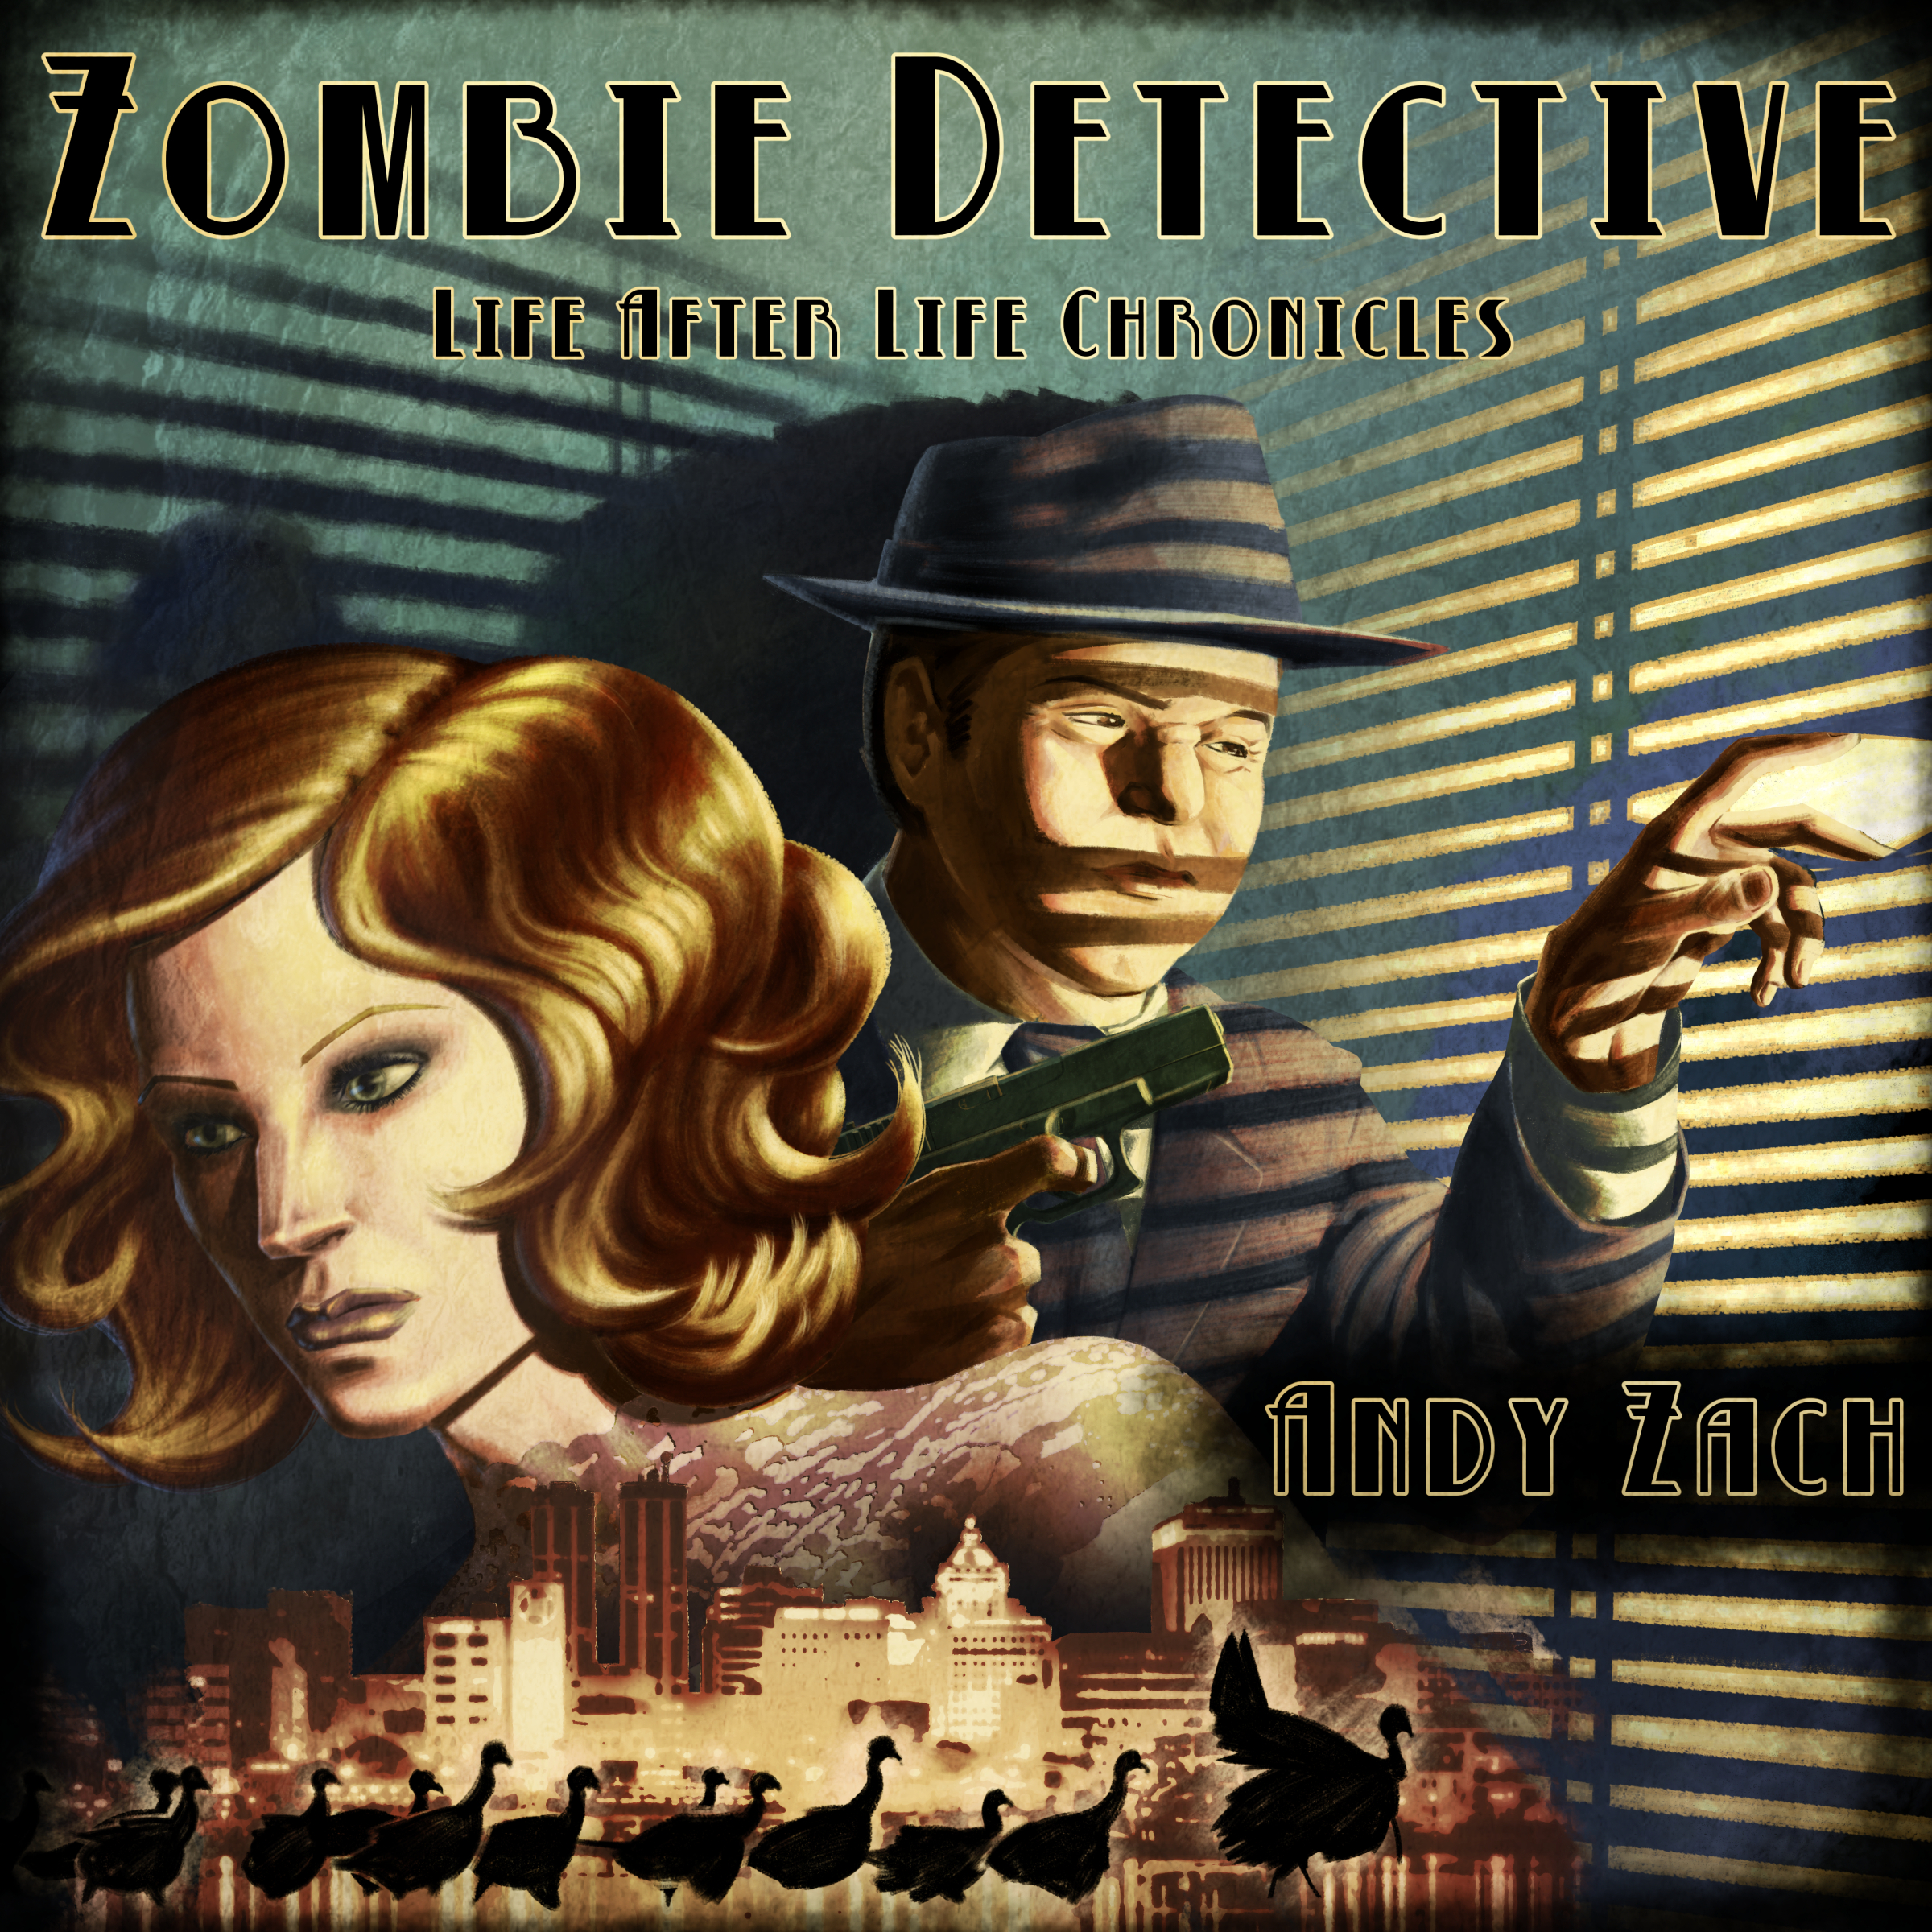 Your Thirteenth Literary Gift Andy Zach Newsletter Zombie Detective Audiobook